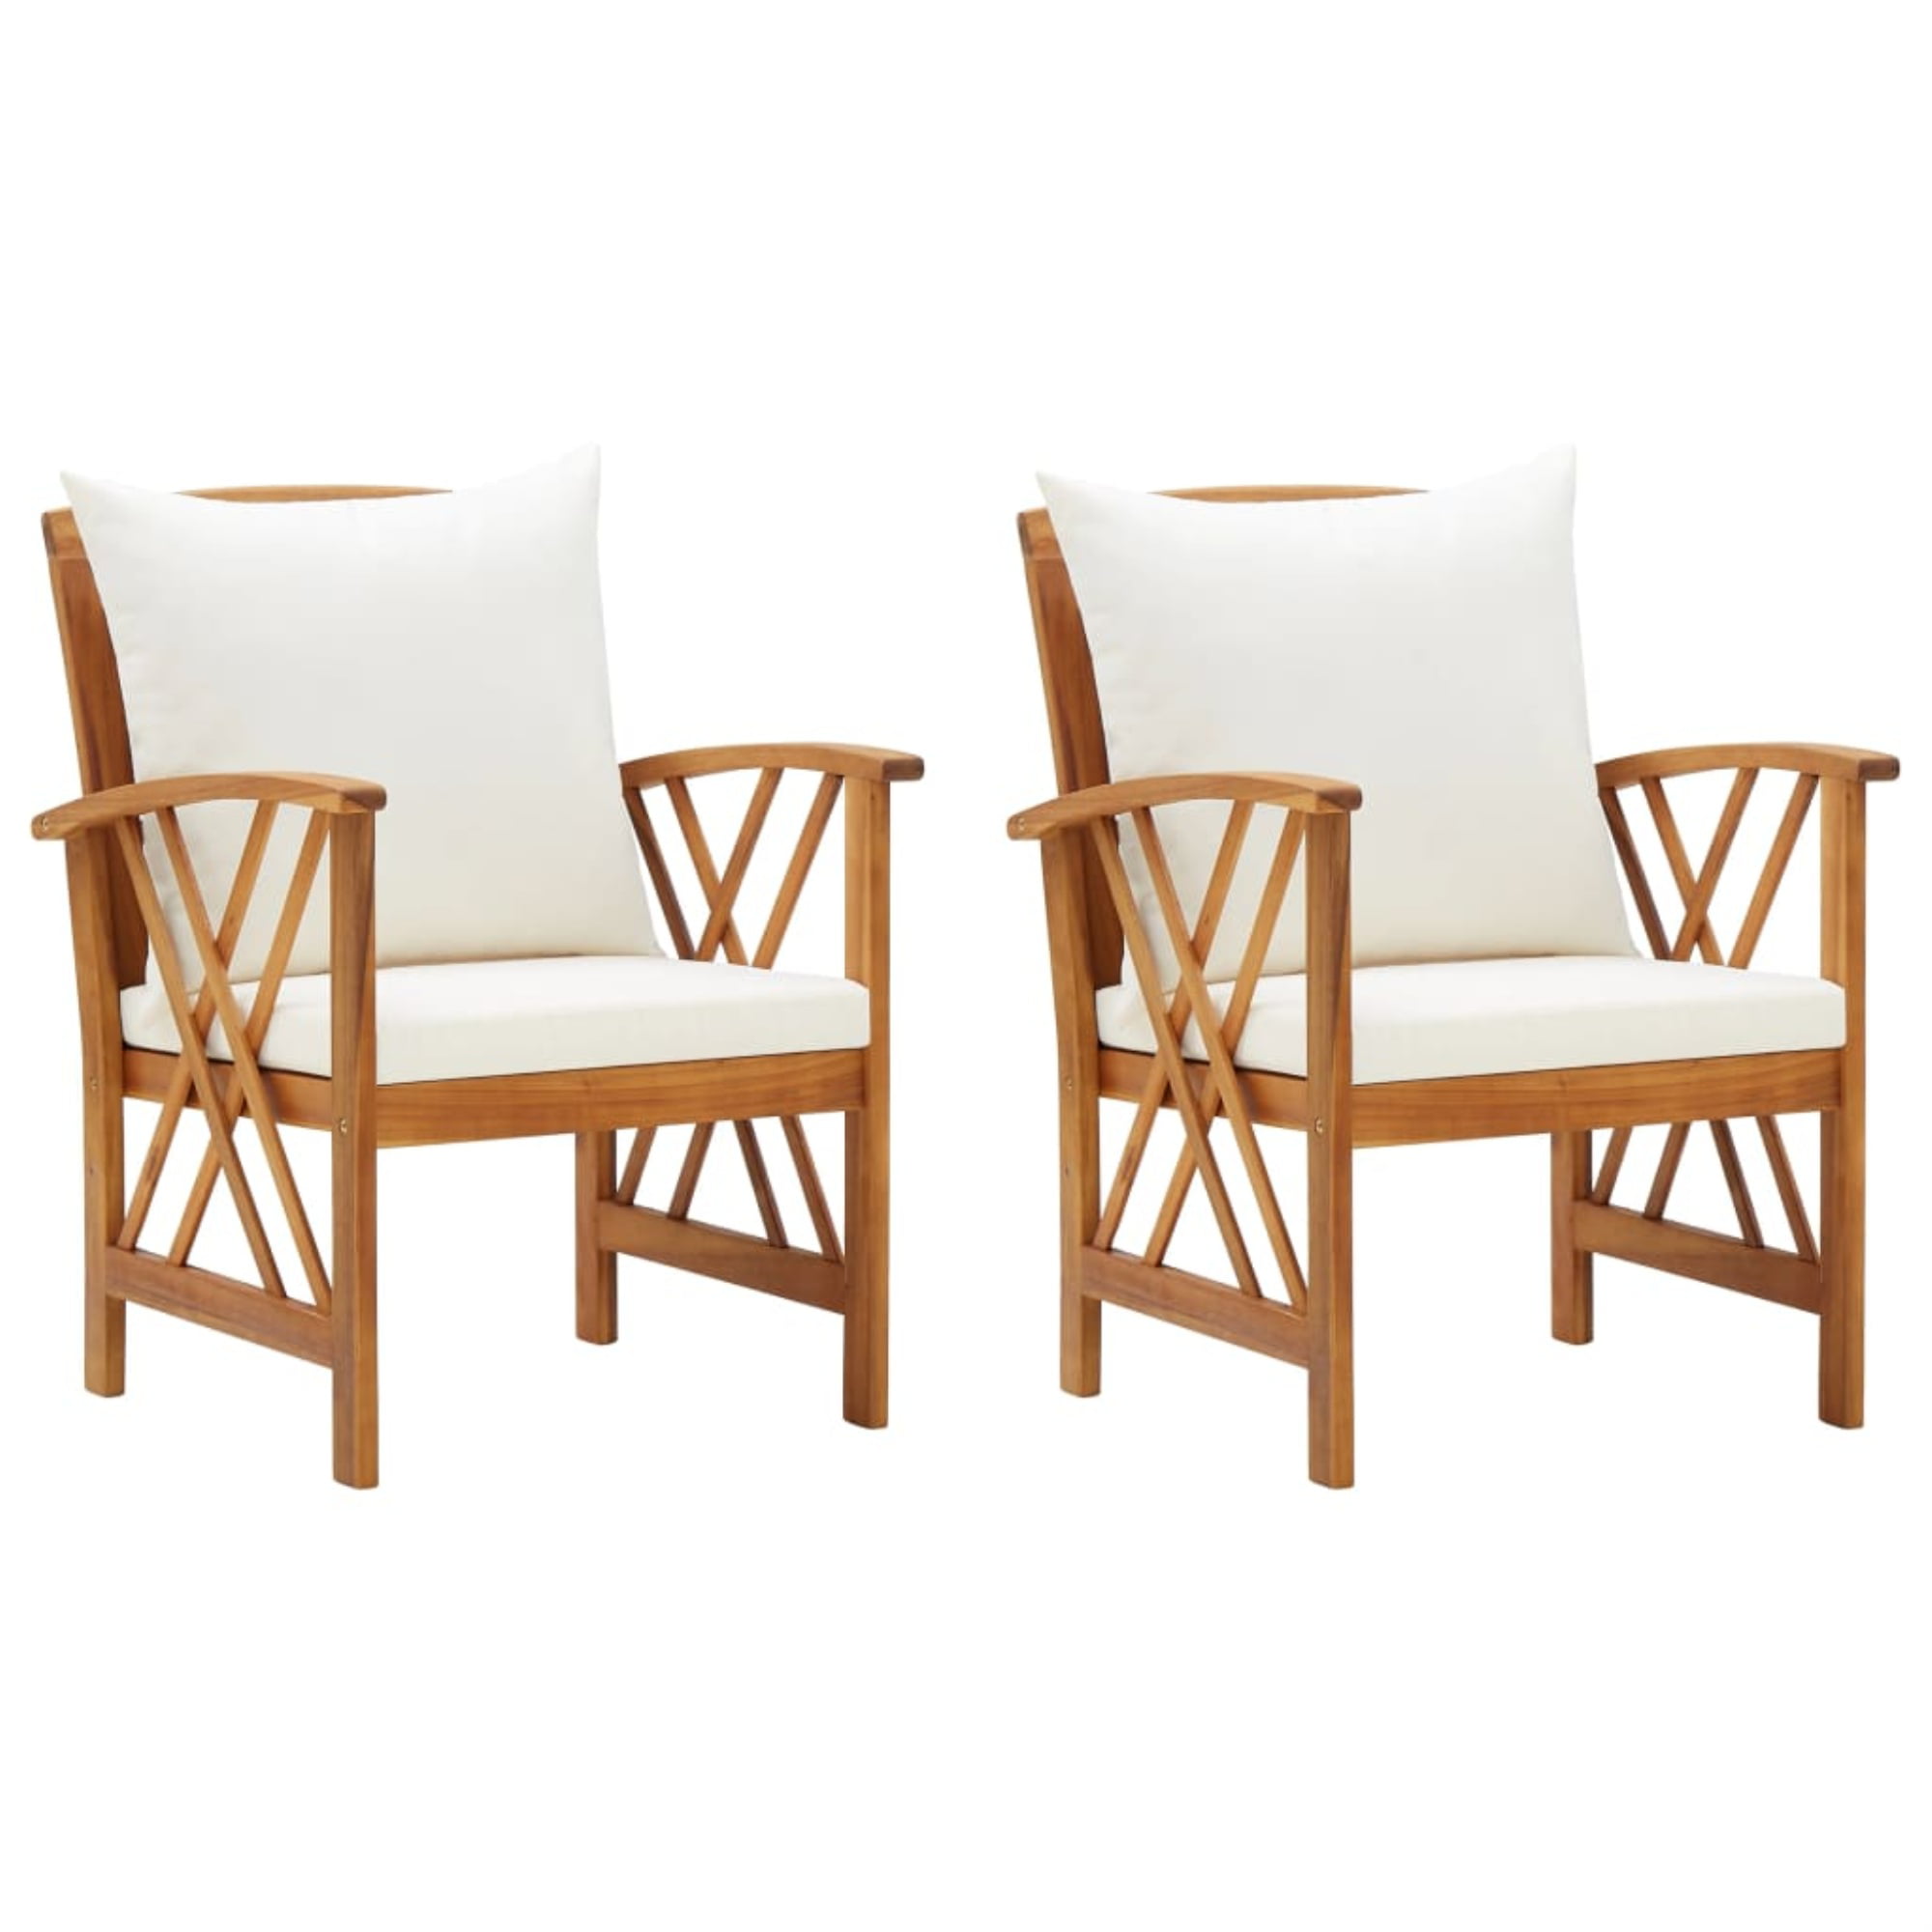 vidaXL Solid Acacia Wood 3 Piece Outdoor Dining Set with Cream White Cushions Garden Patio Terrace Dinner Table Chairs